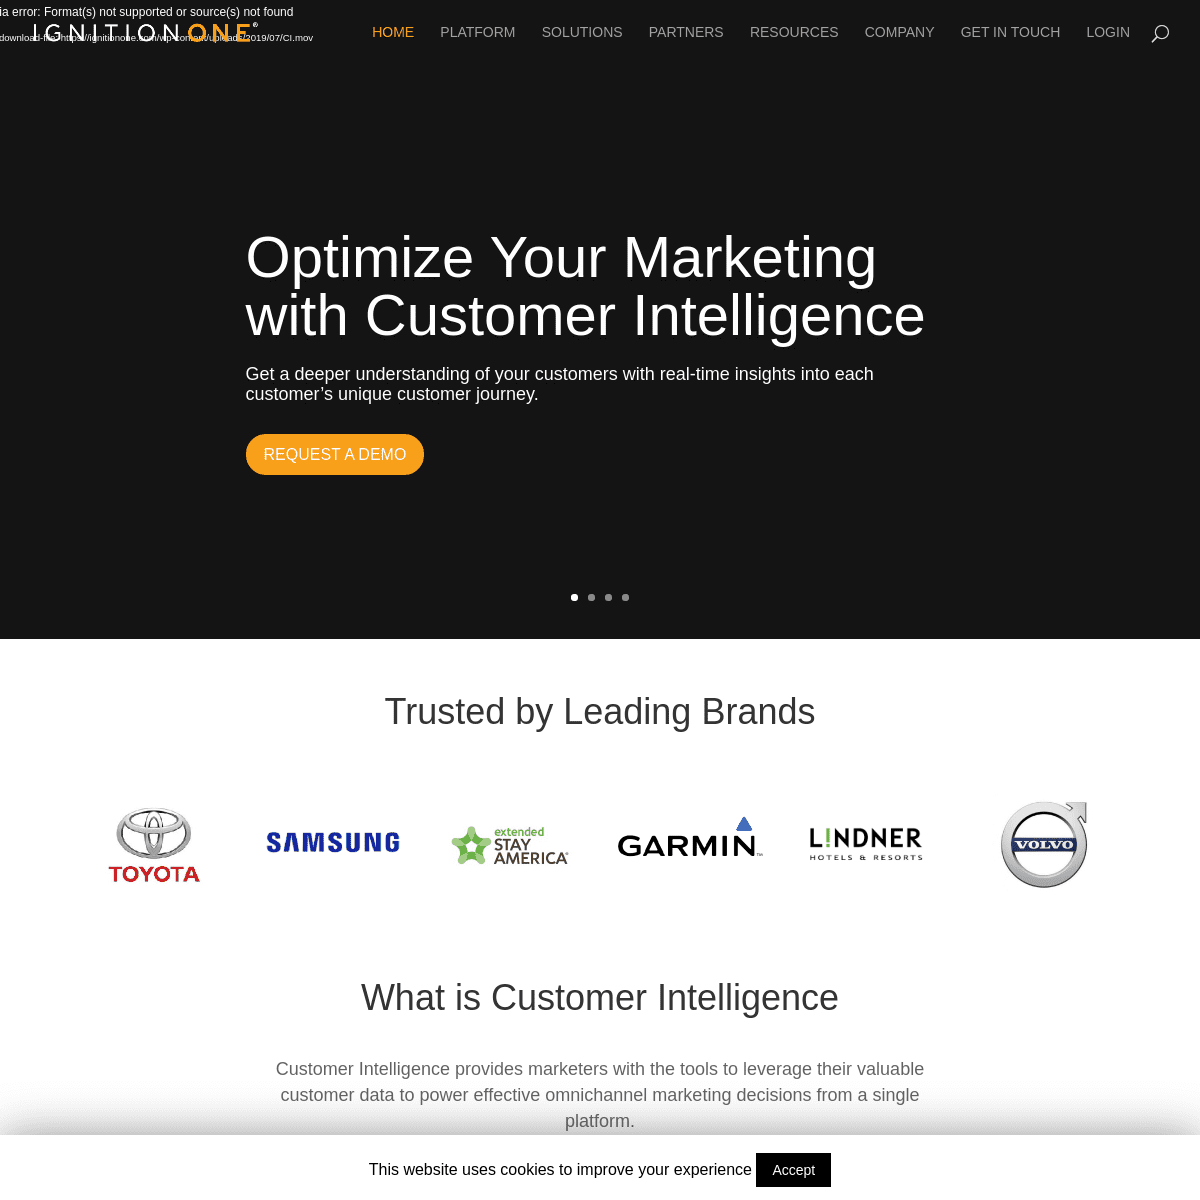 A complete backup of ignitionone.com